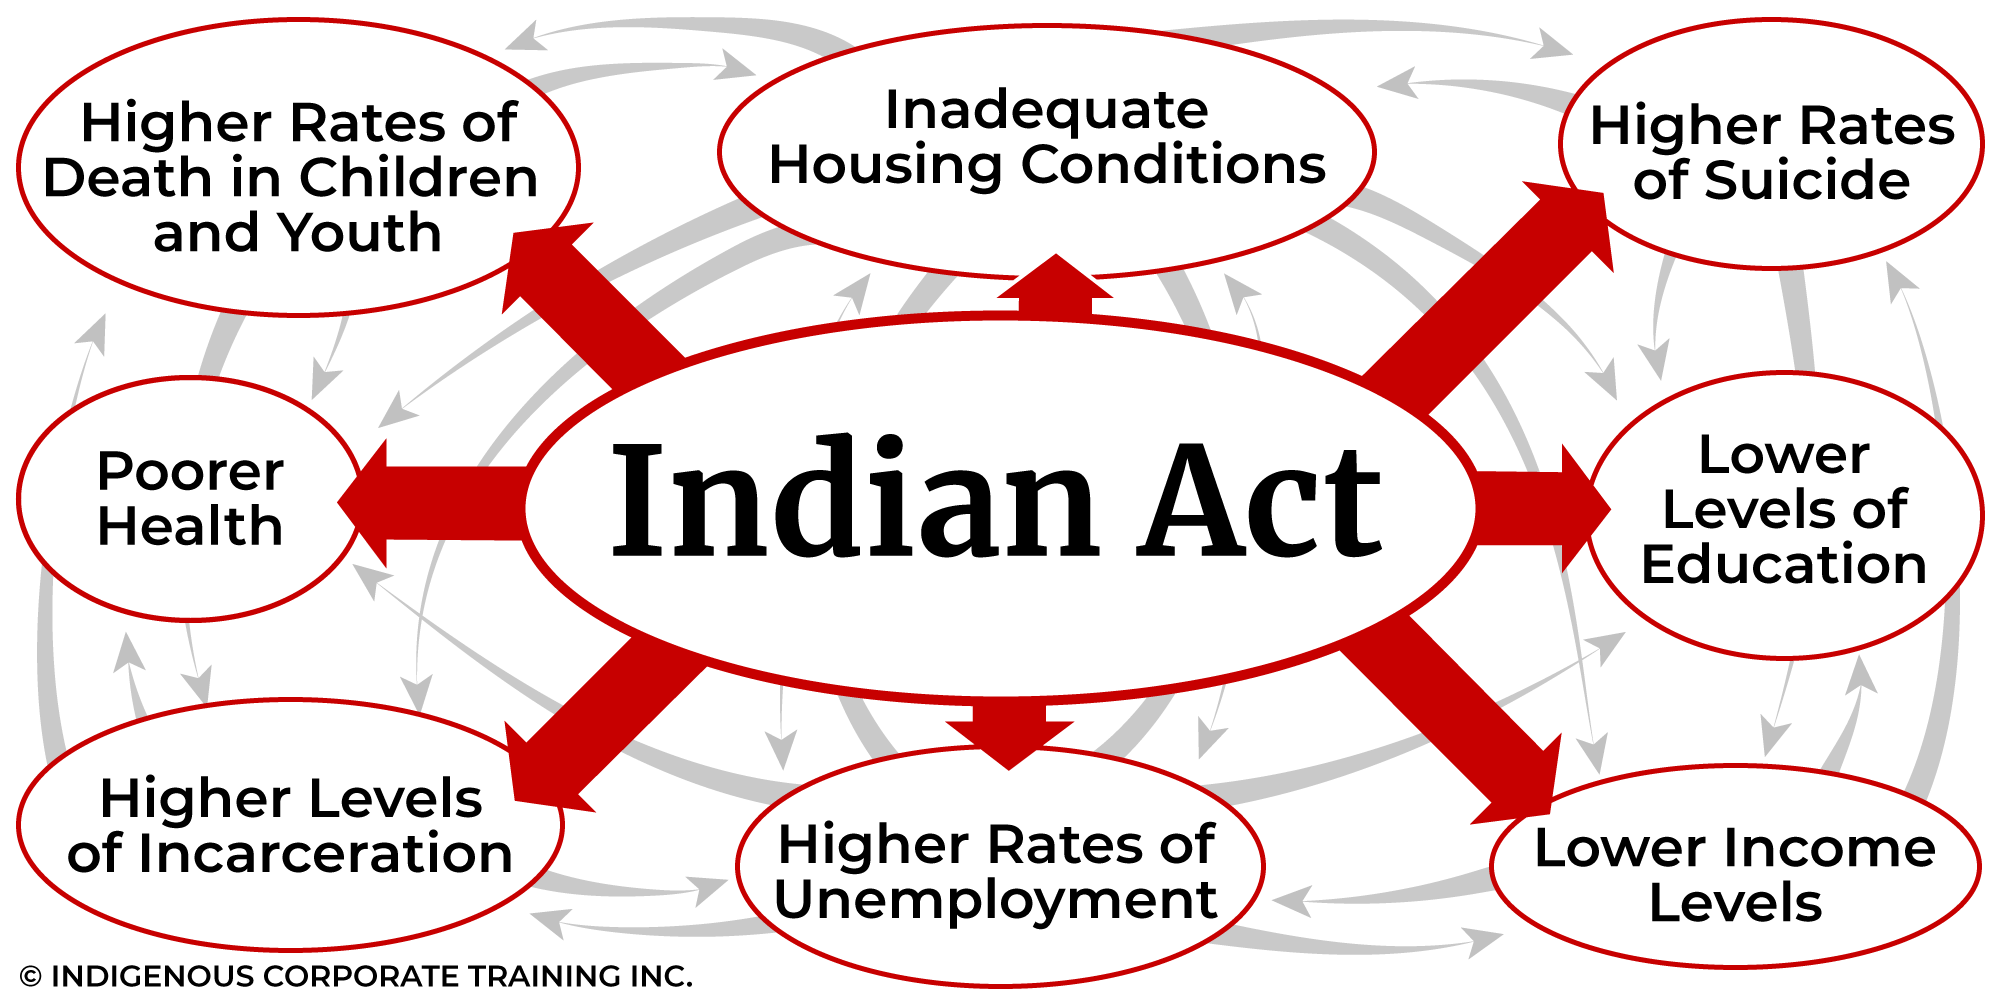 8 Key Issues for Indigenous Peoples in Canada and how they relate to the Indian Act.